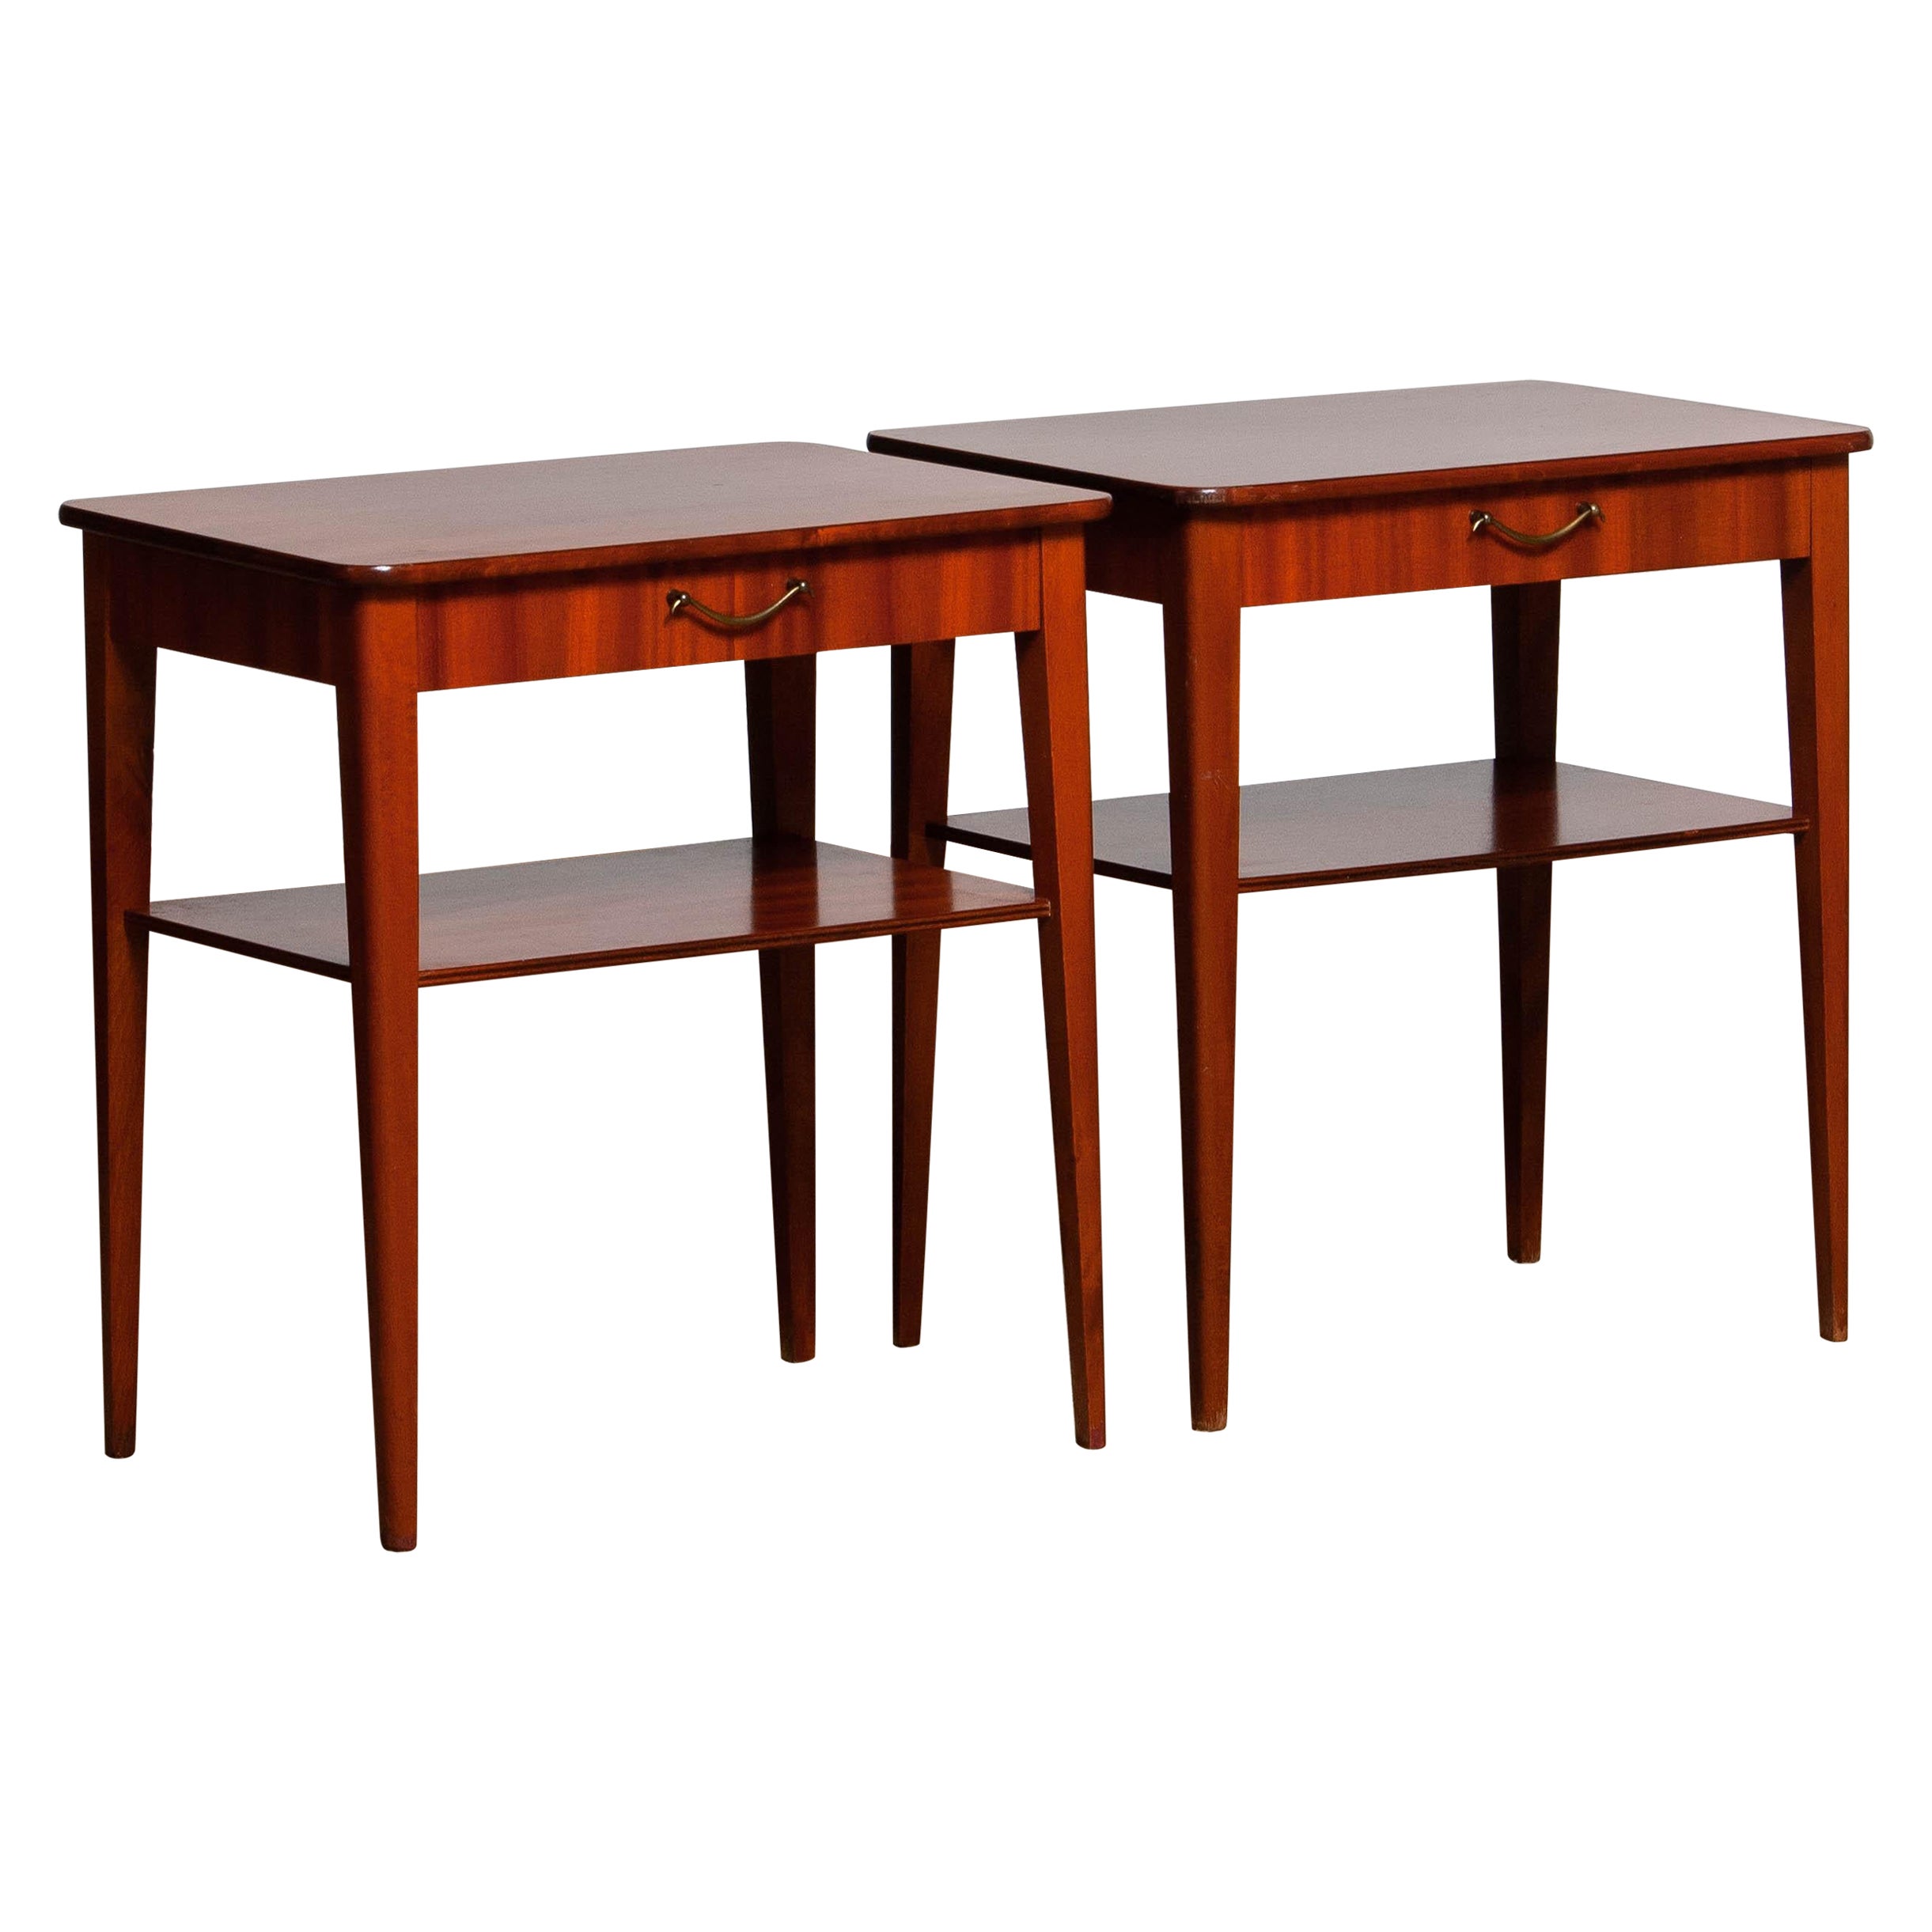 1960's Pair Slim Scandinavian Mahogany Night Stands / Bedside Tables from Sweden